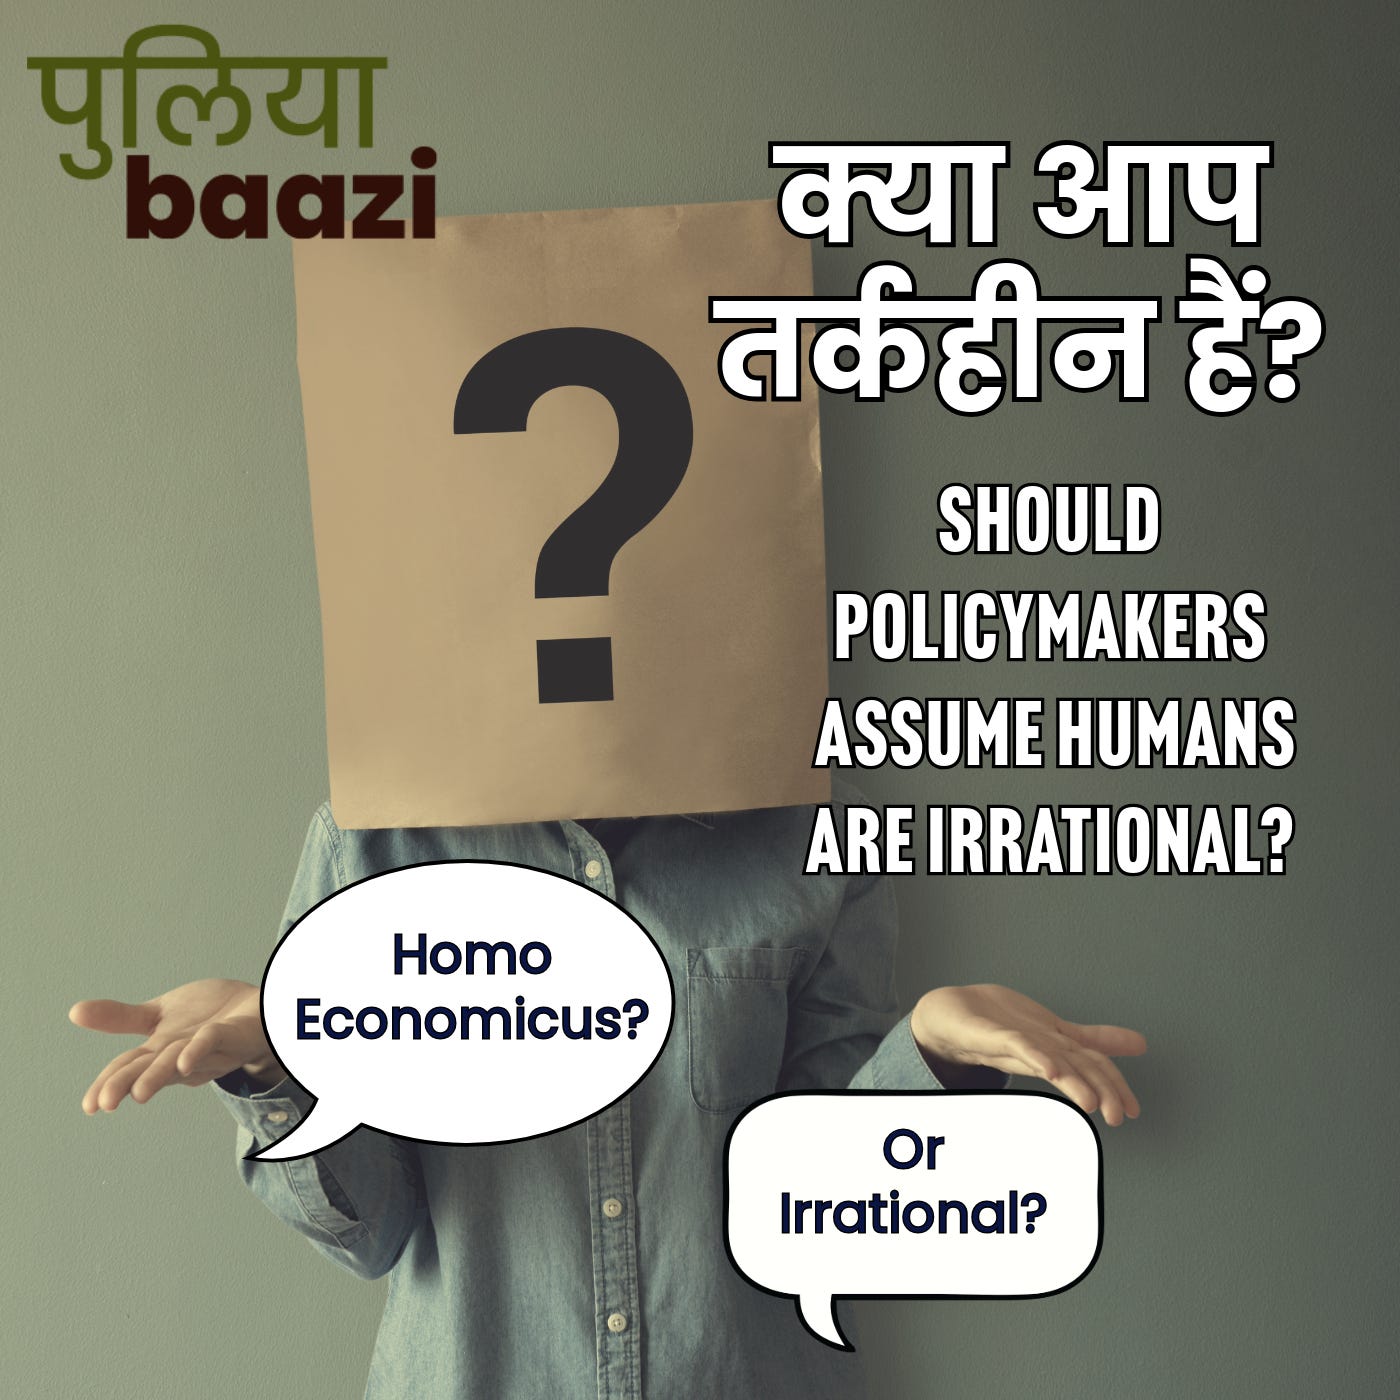 क्या आप तर्कहीन है? Should policymakers assume humans are irrational?